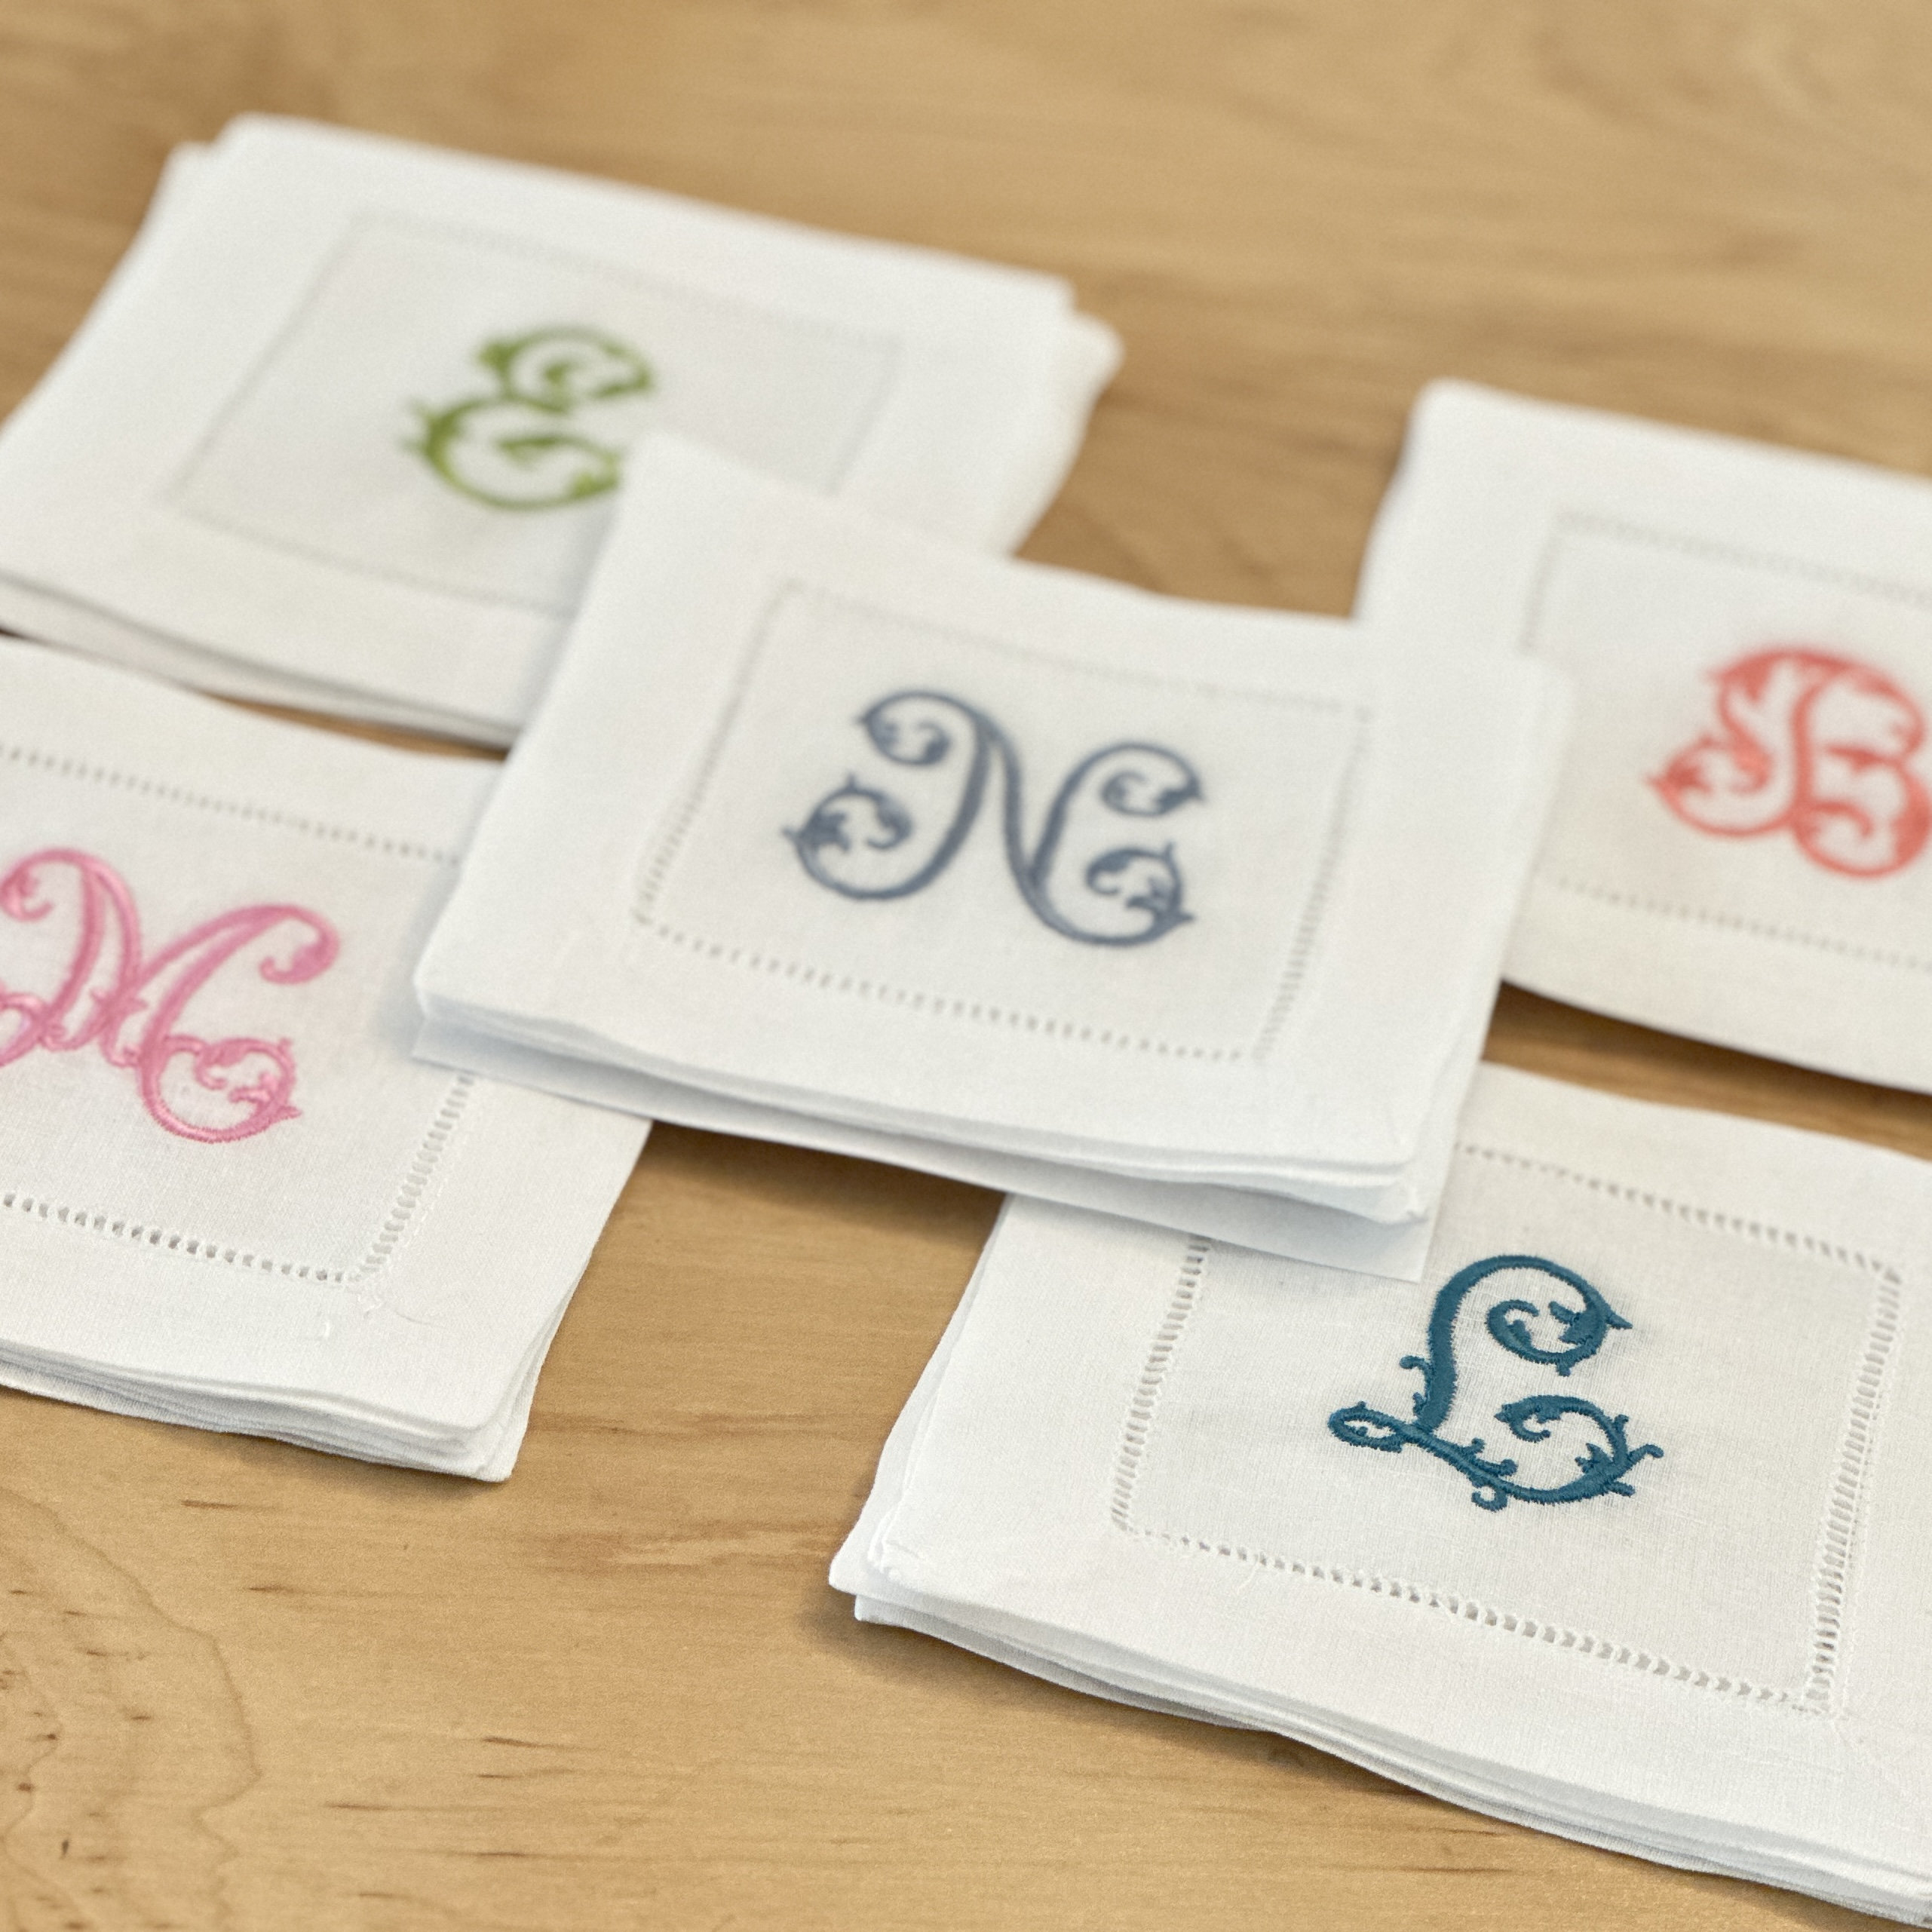 Monogrammed White Dinner Napkins - Happy Thoughts Gifts